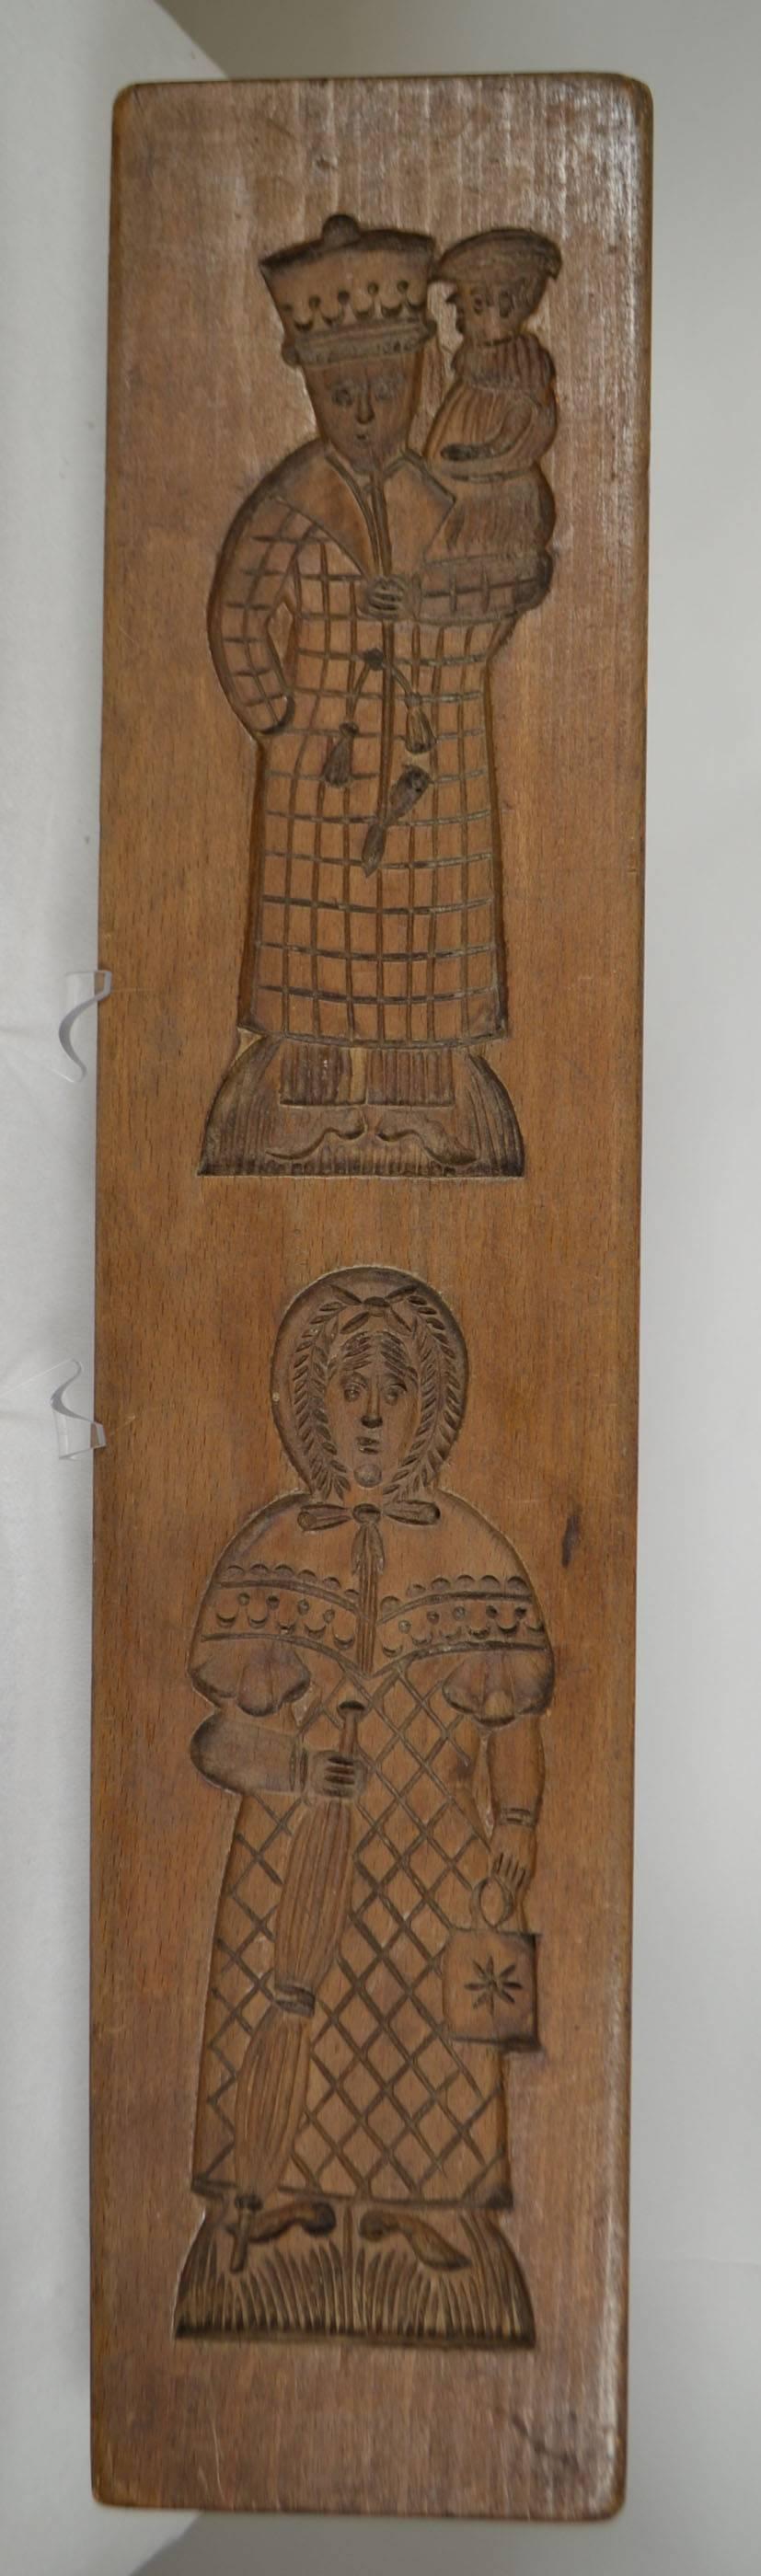 Double-sided wooden gingerbread mold, (man and woman) both sides.